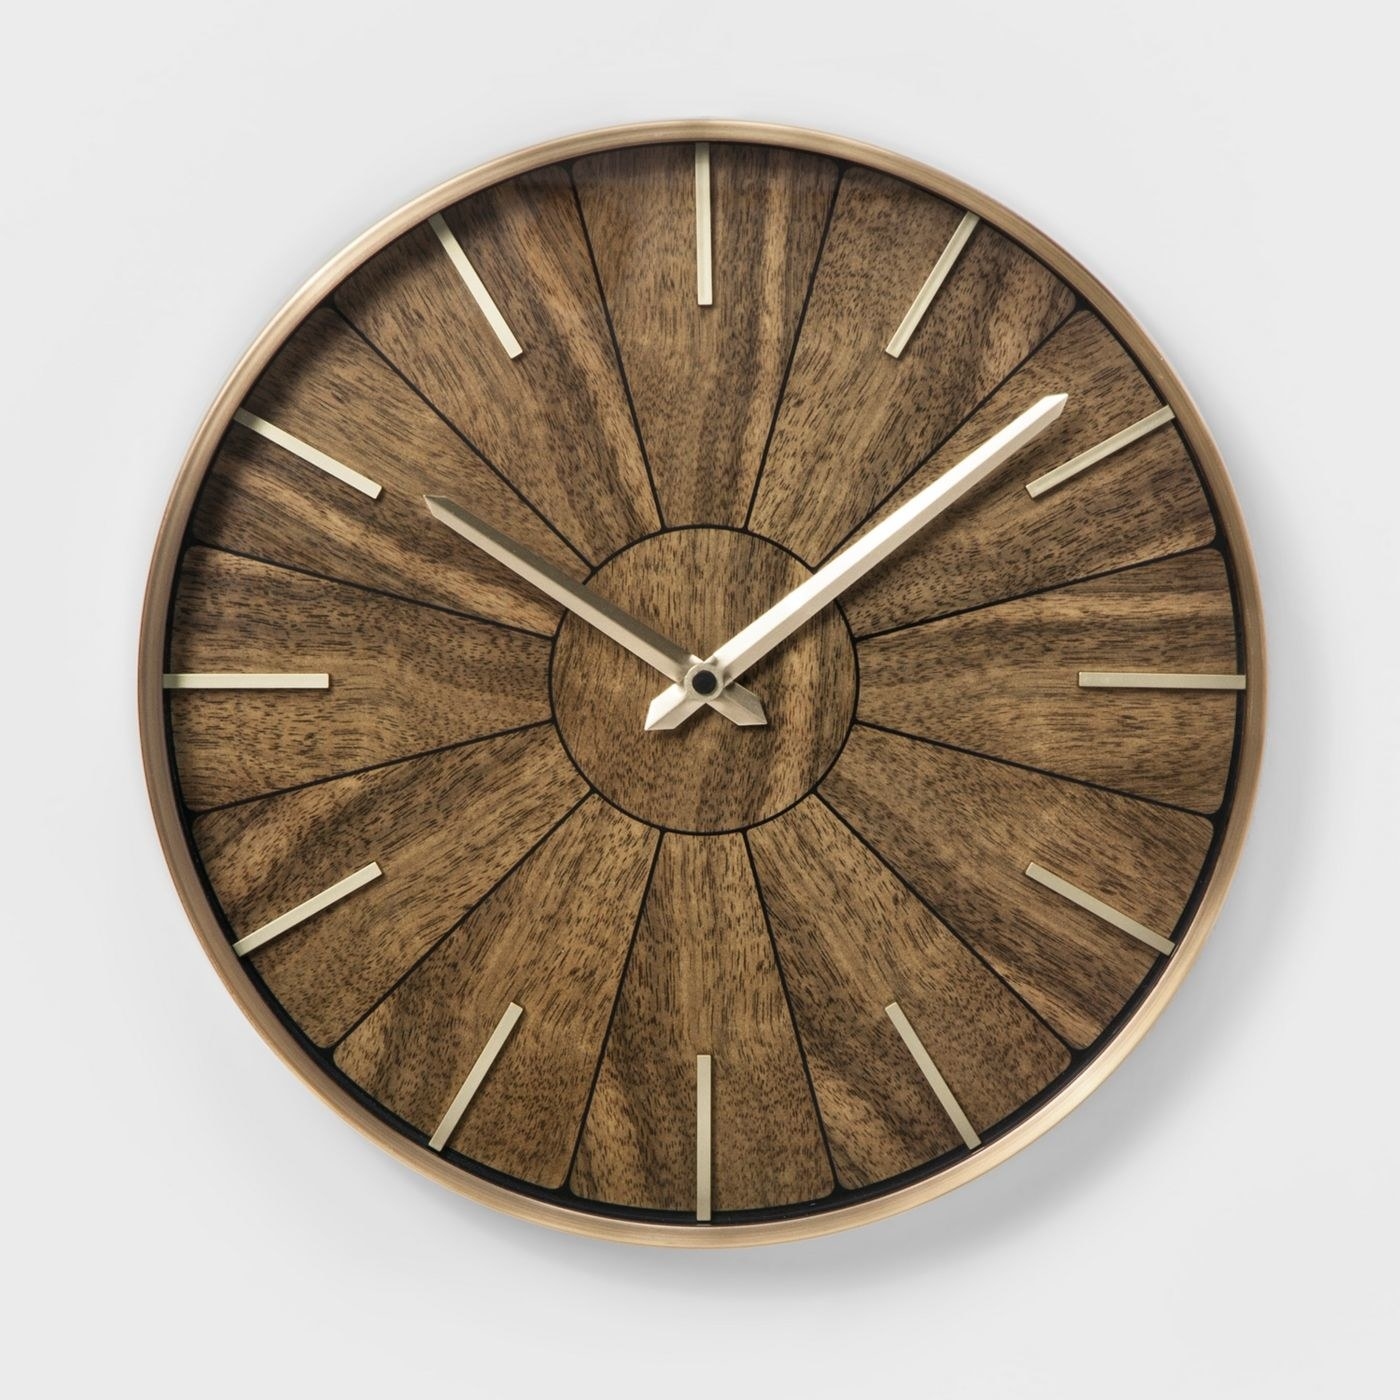 A wooden clock on a wall